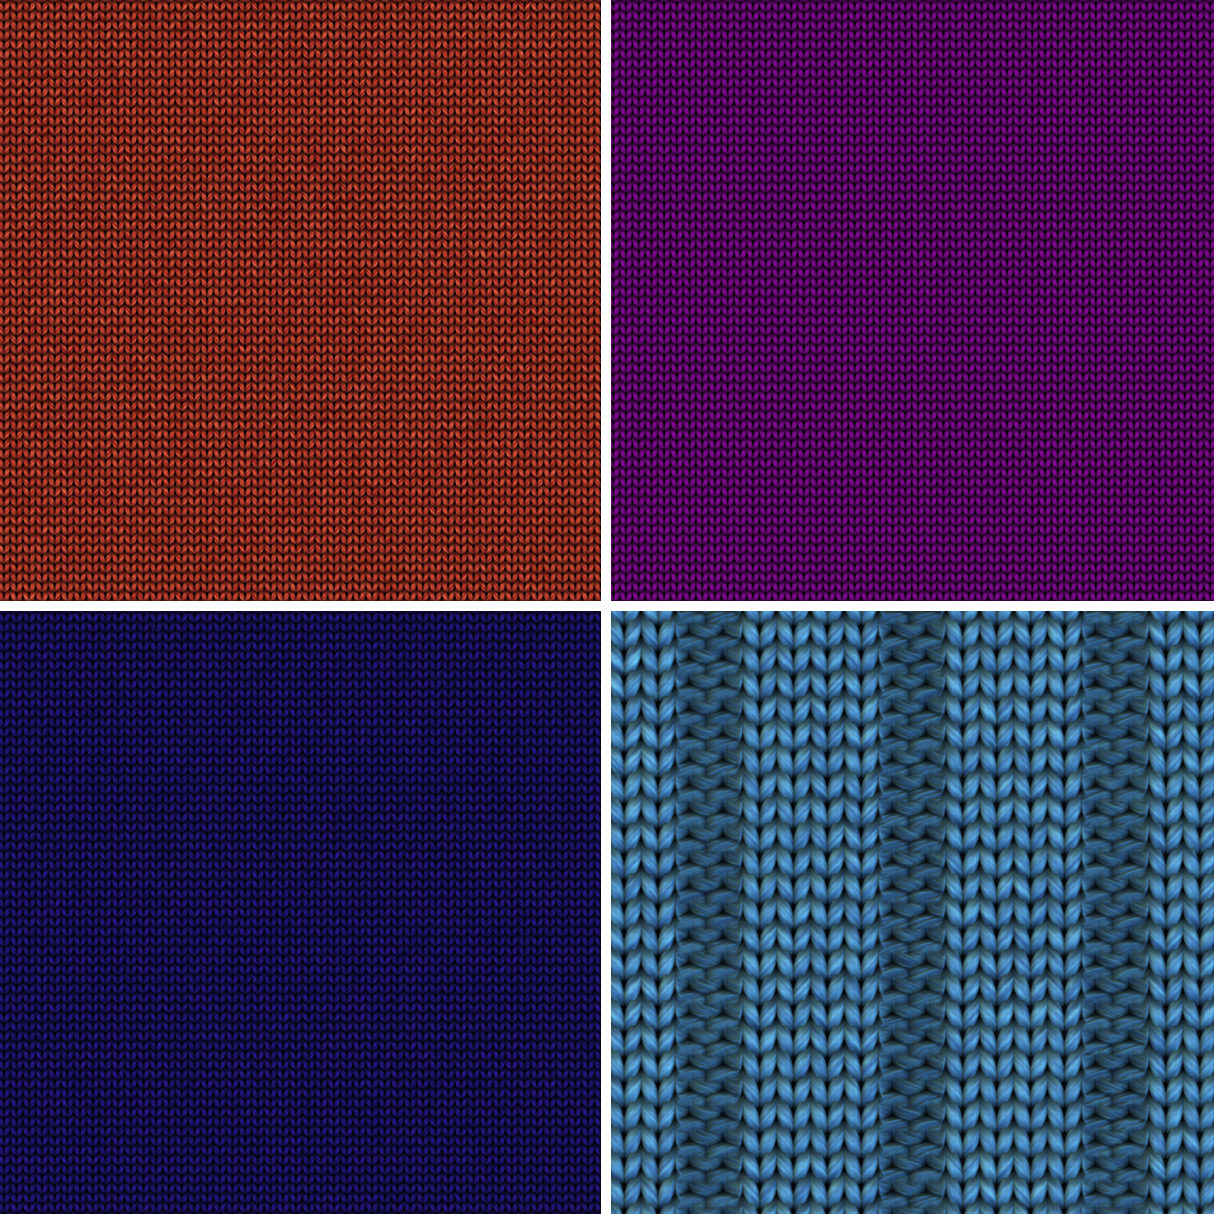 30 Knitted Background Textures Samples Preview – Part 4